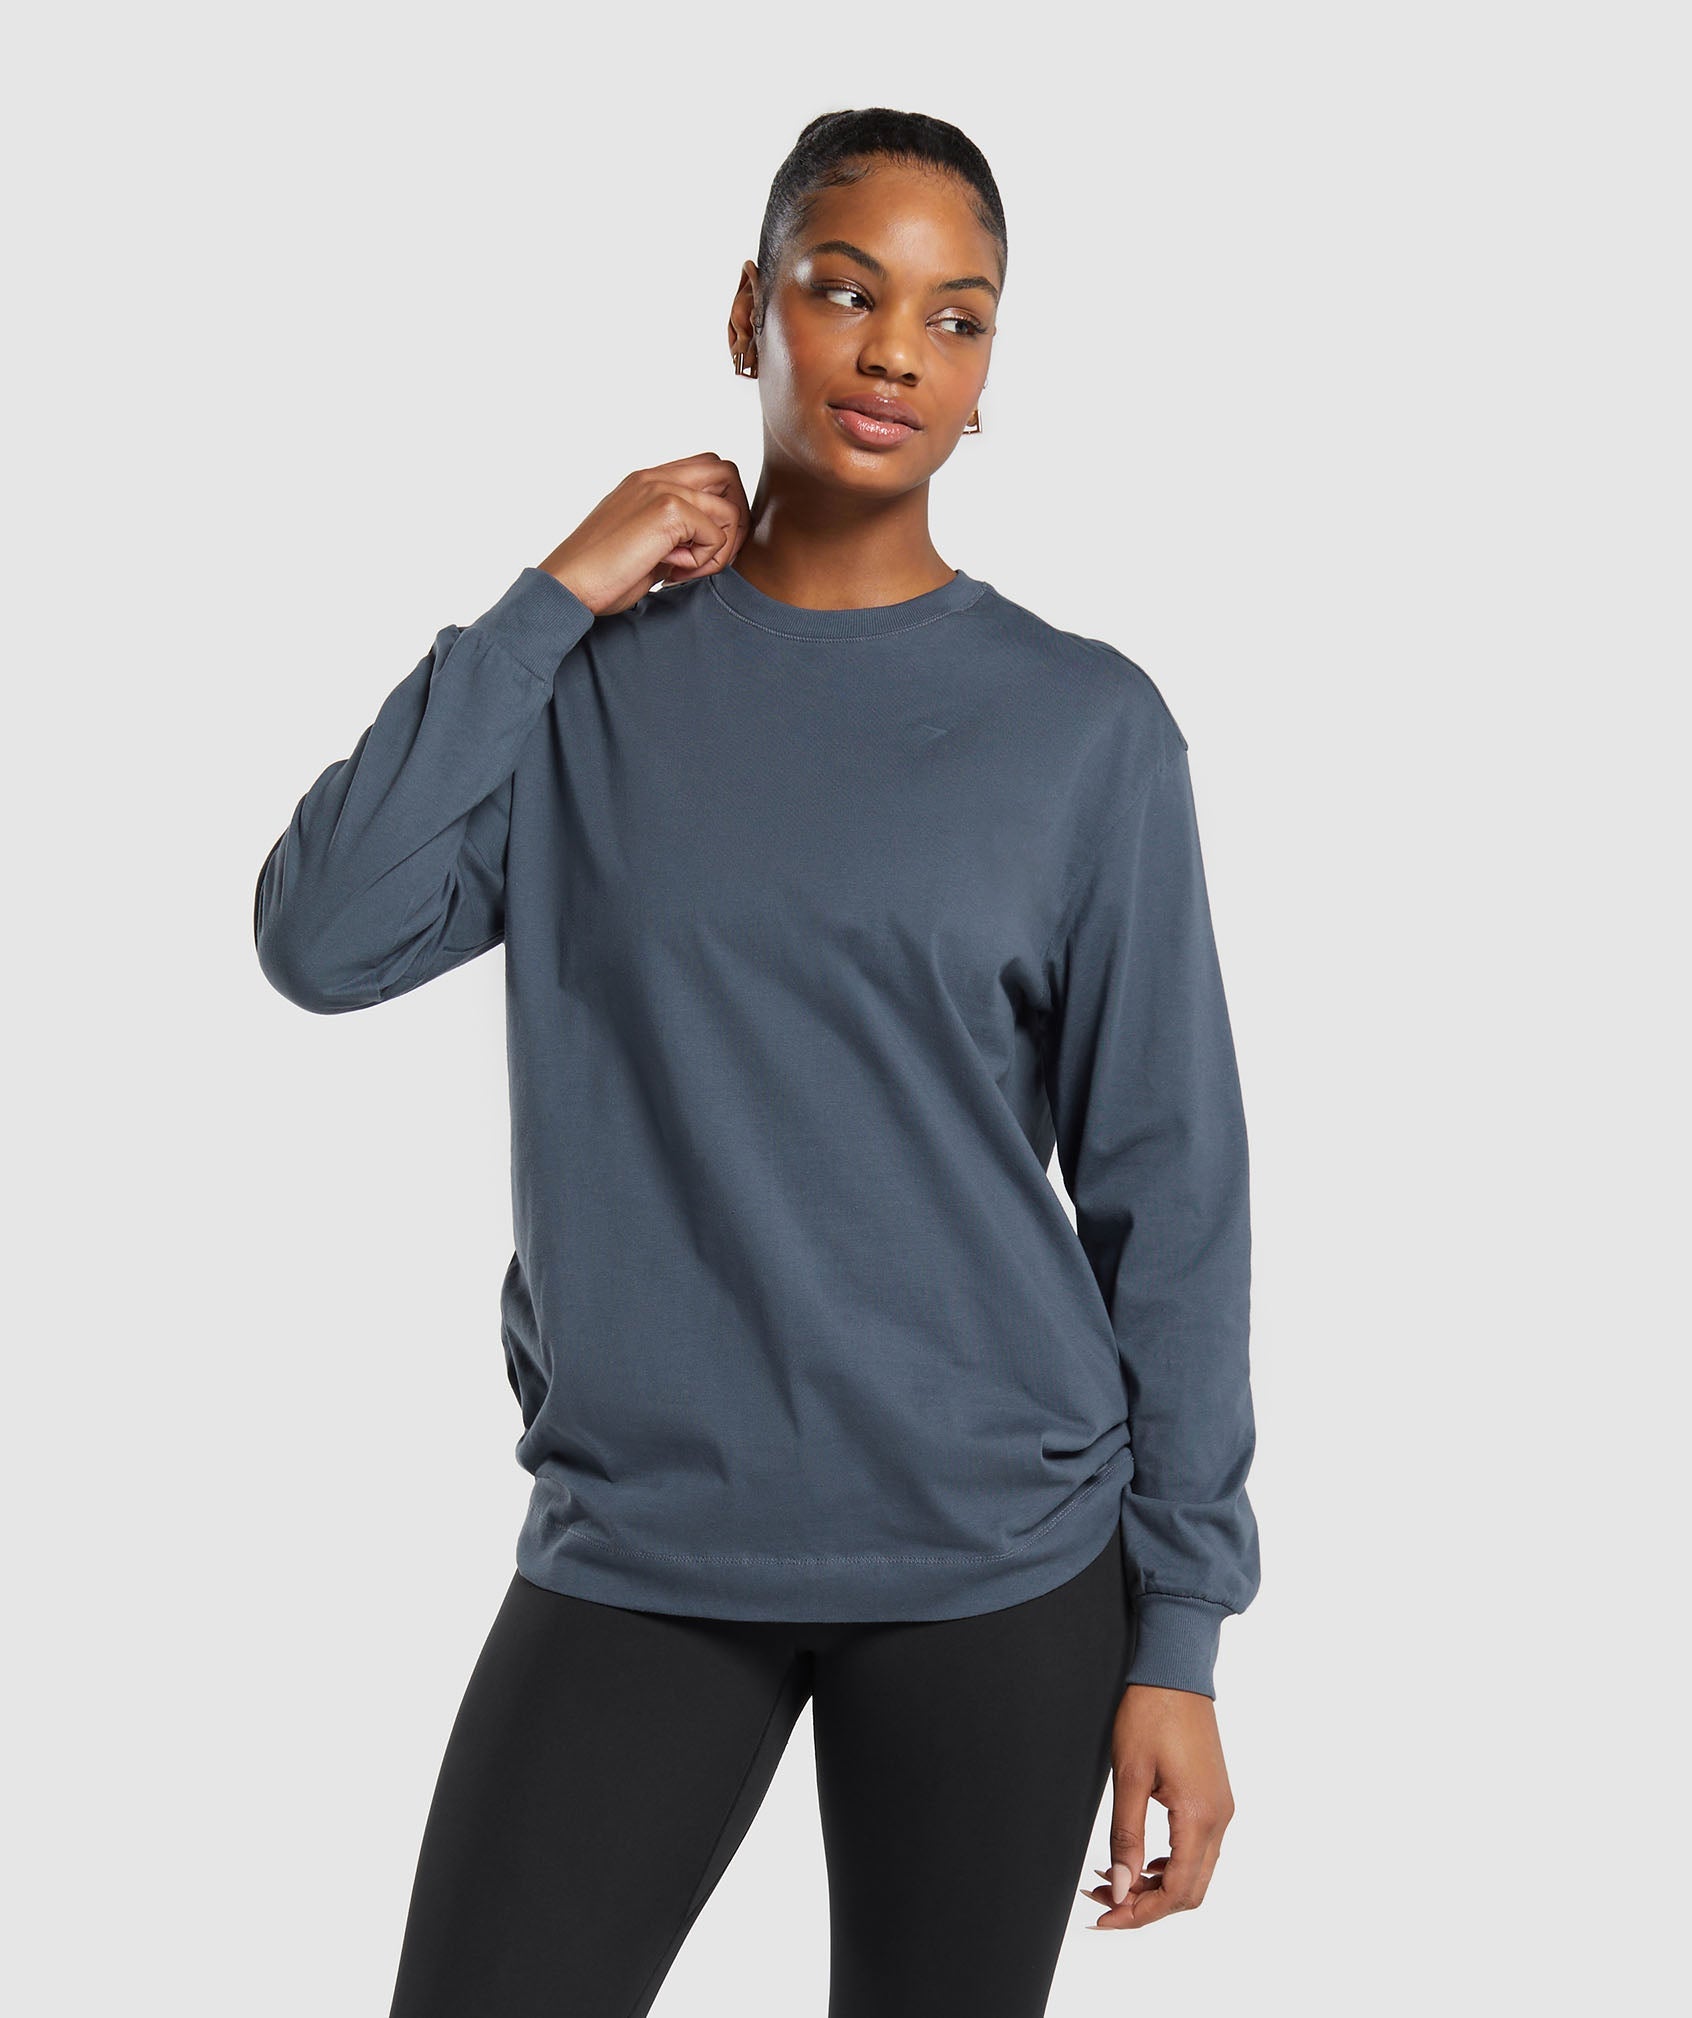 Cotton Oversized Long Sleeve Top in Titanium Blue is out of stock